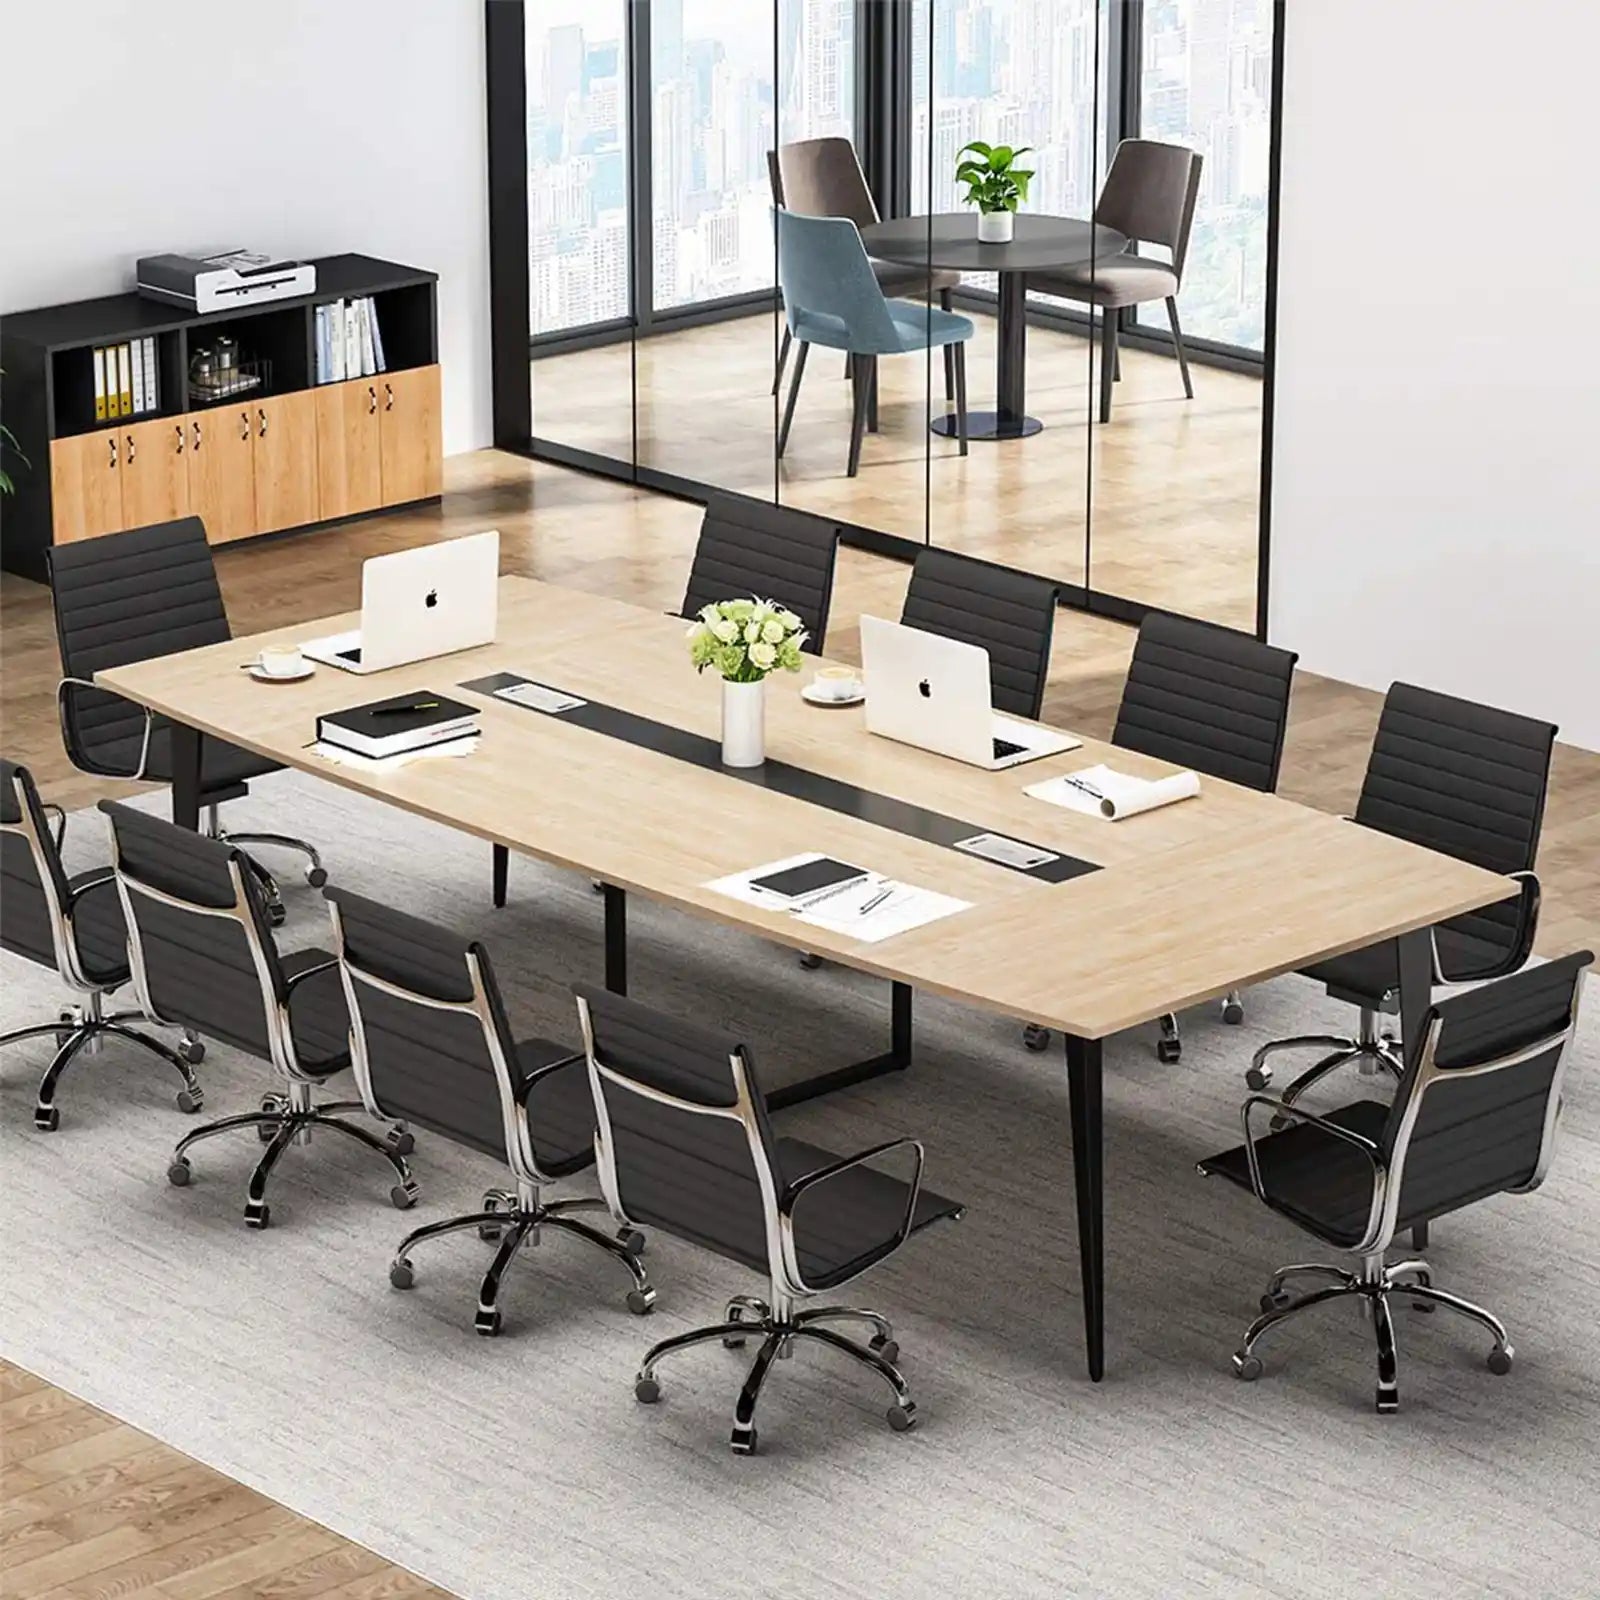 Shaped Meeting Table with Rectangle Seminar Table